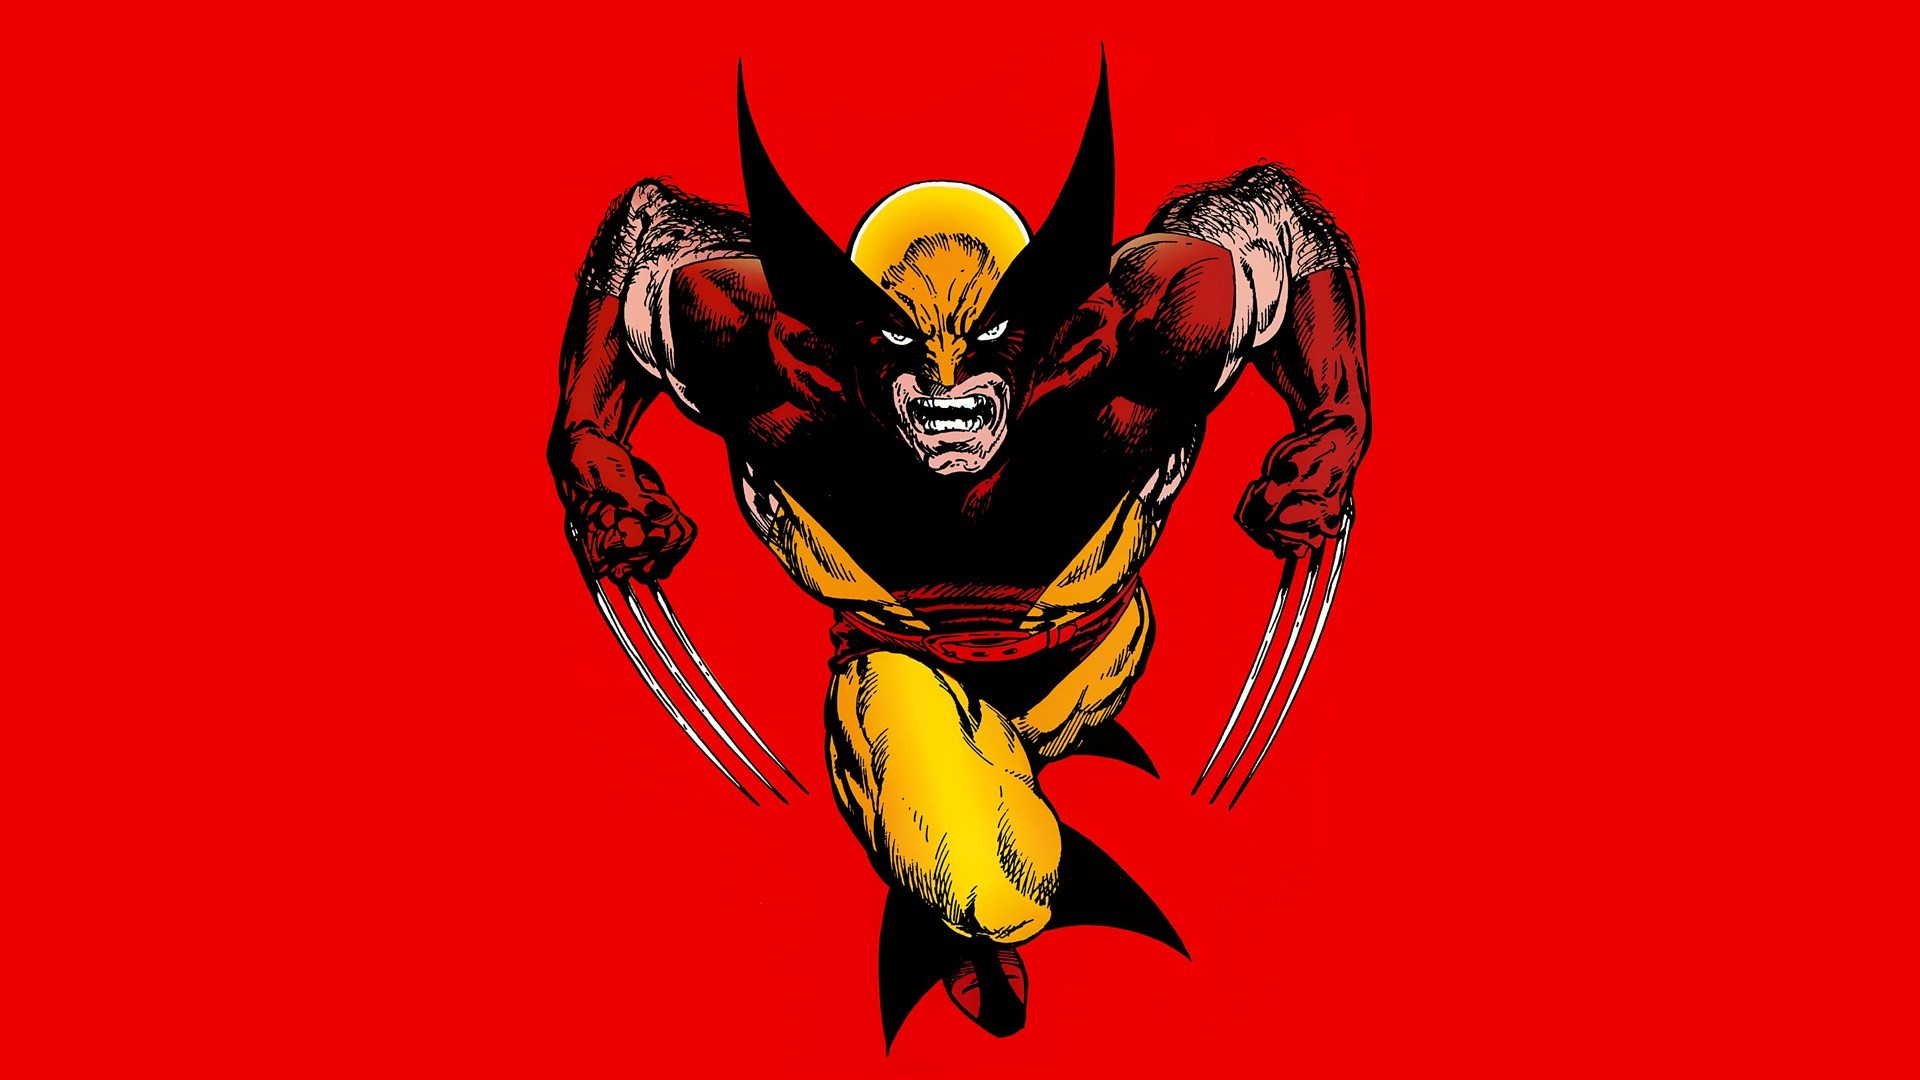 1920x Wolverine Wallpaper For Mac Desktop Data Red And Yellow